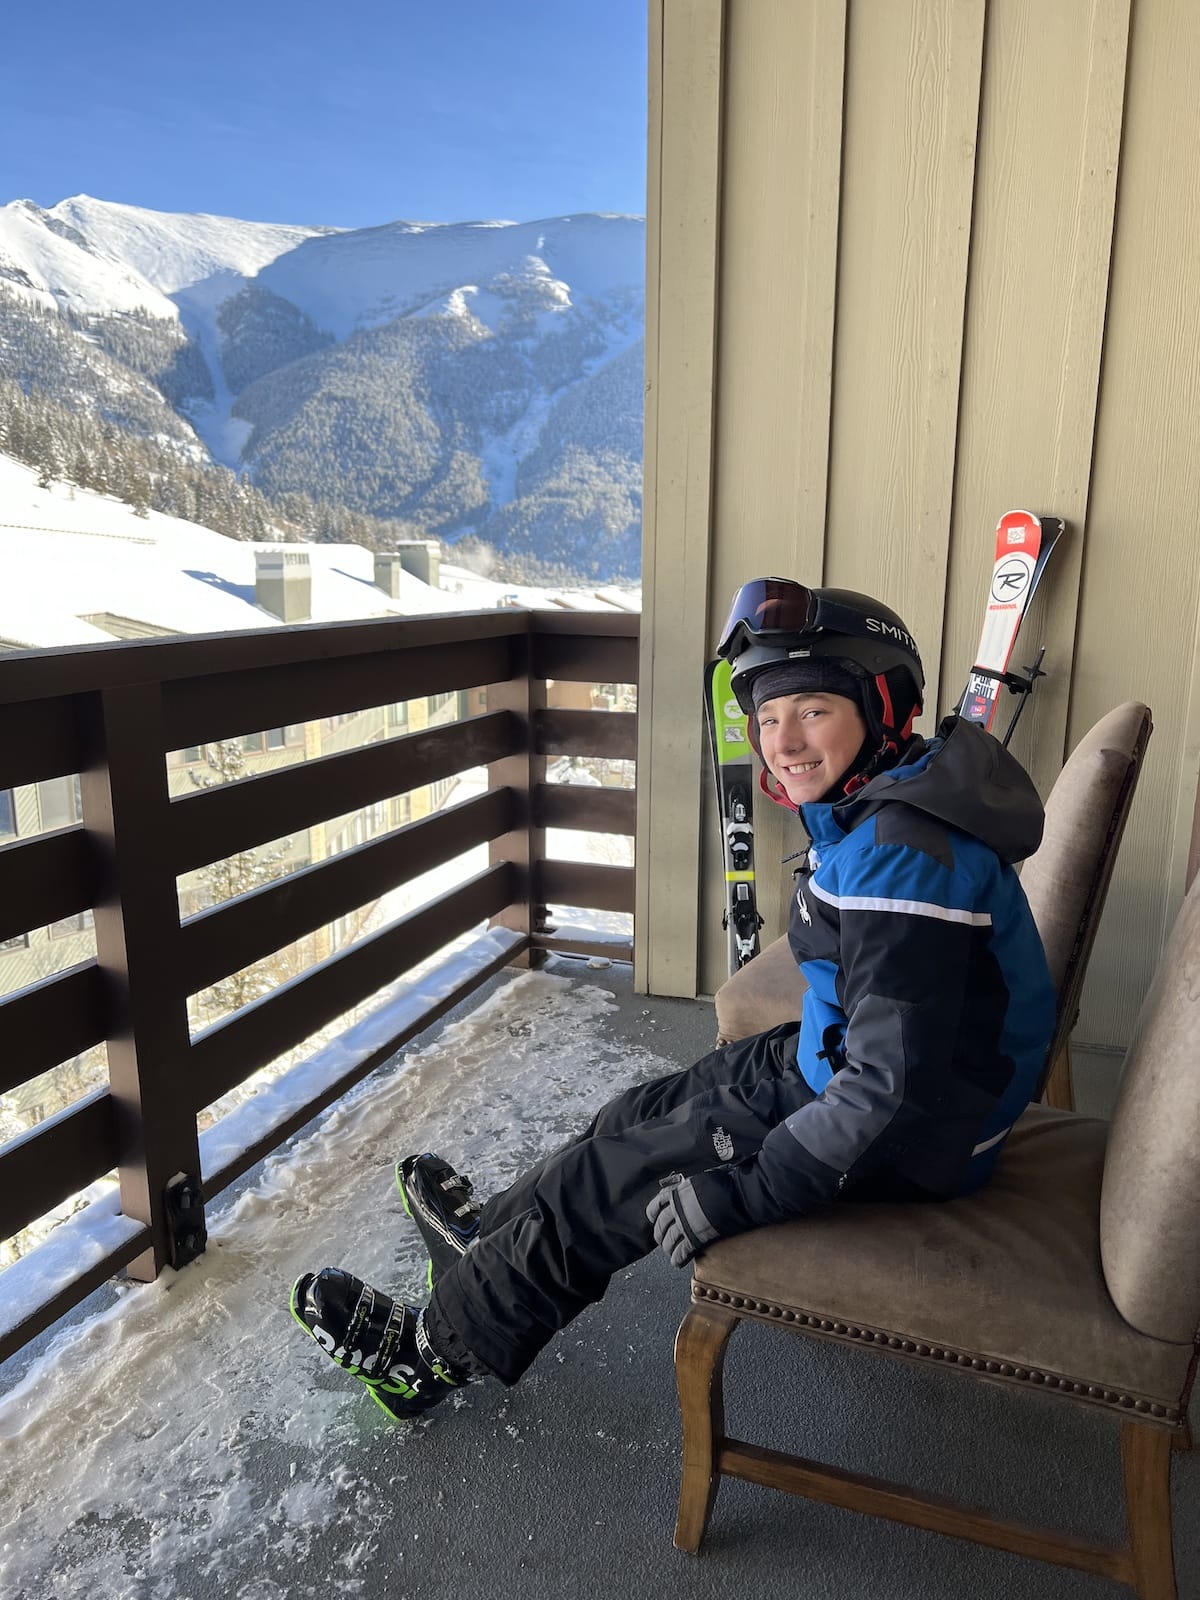 Ski Trip Packing List: Must Have Kids Ski Gear for Cold Weather. What to Pack and bring for a Successful Ski or Snowboard Trip For Your Family